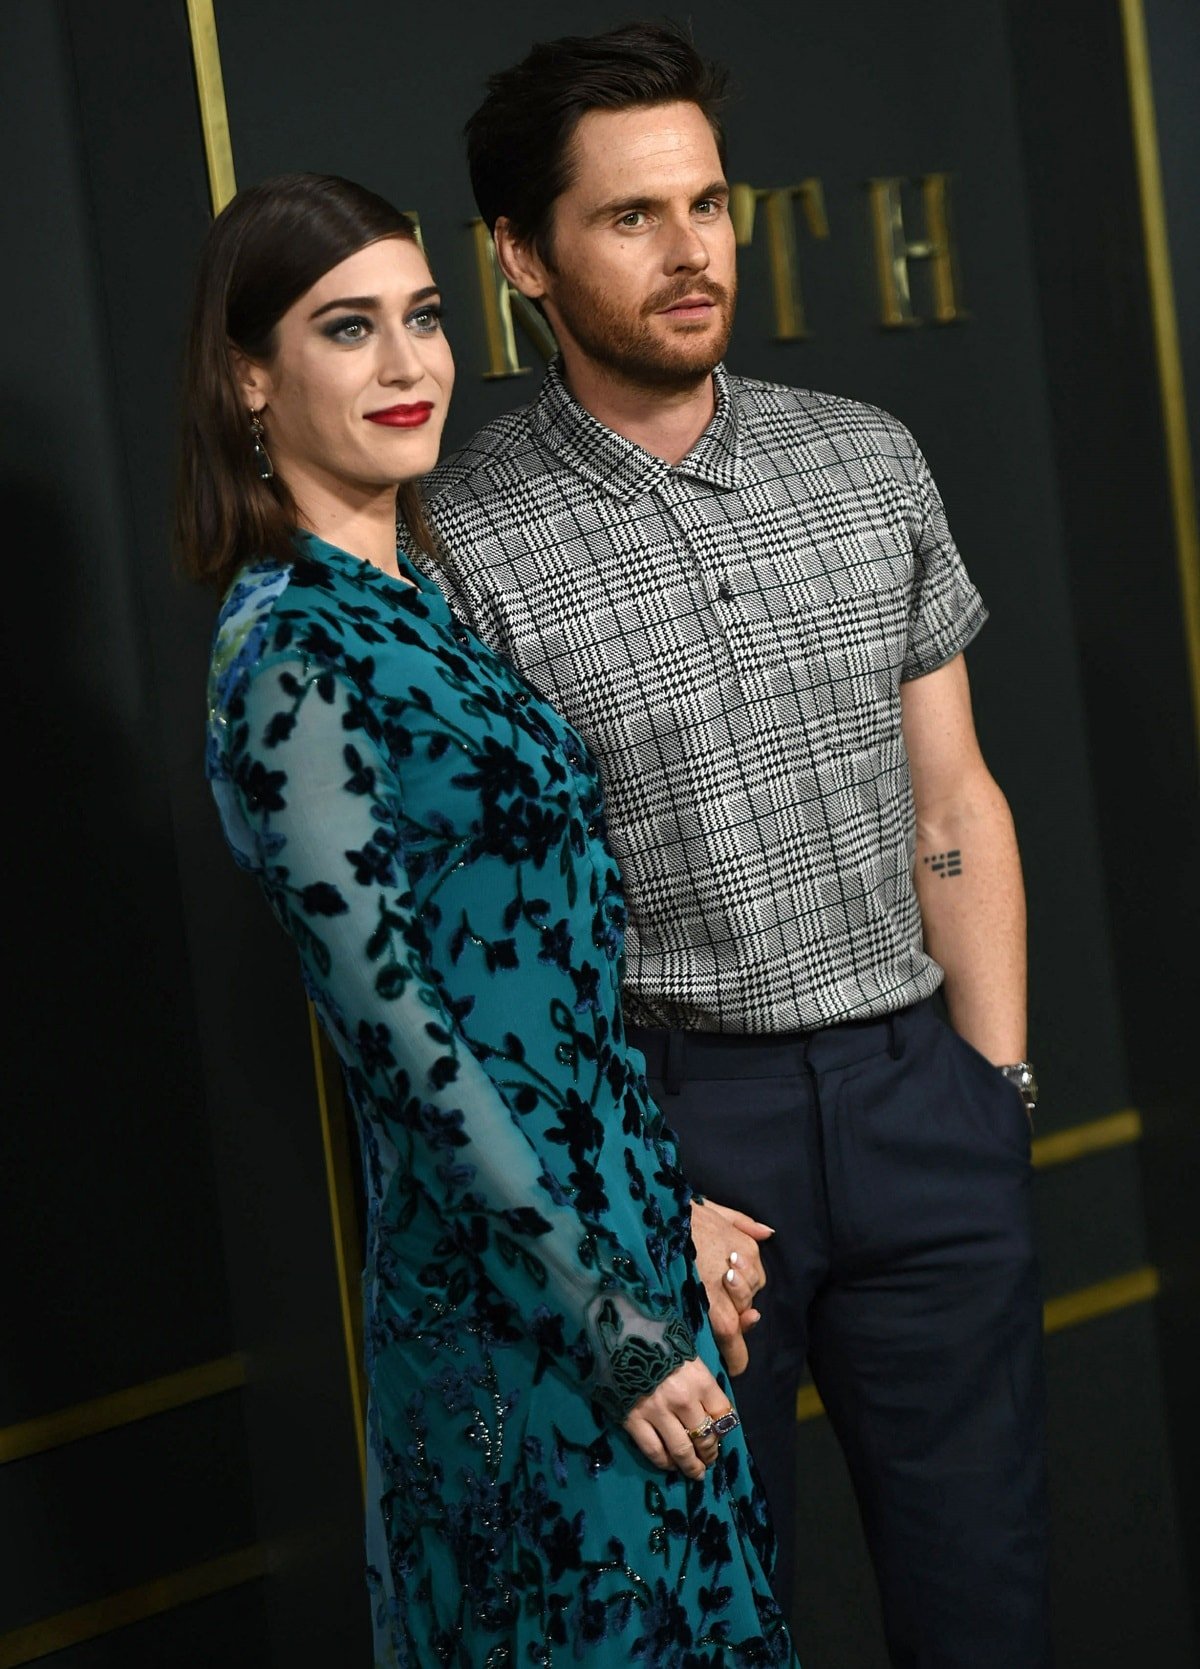 Lizzy Caplan in a Chloe Fall 2019 dress with her husband, Tom Riley, at the premiere of Apple TV+'s 'Truth Be Told'